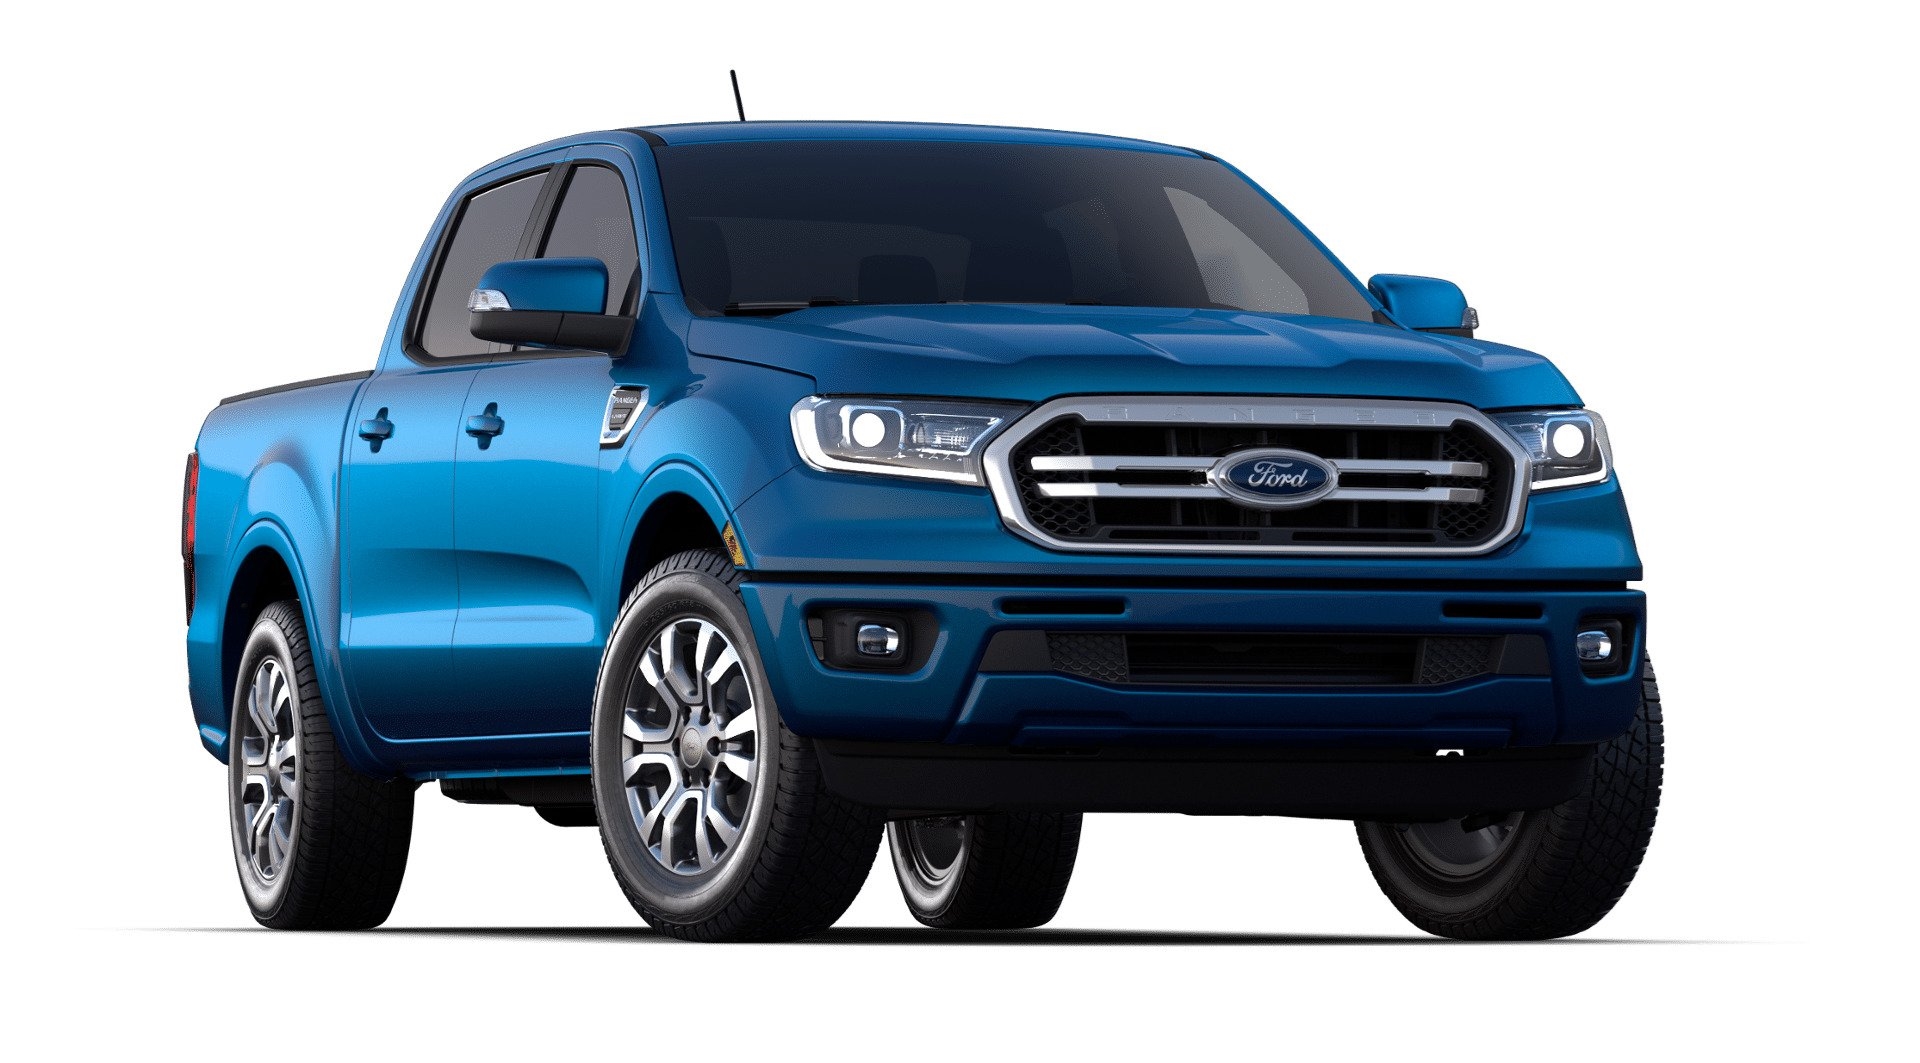 2022 Ford Ranger XLT Full Specs, Features and Price | CarBuzz